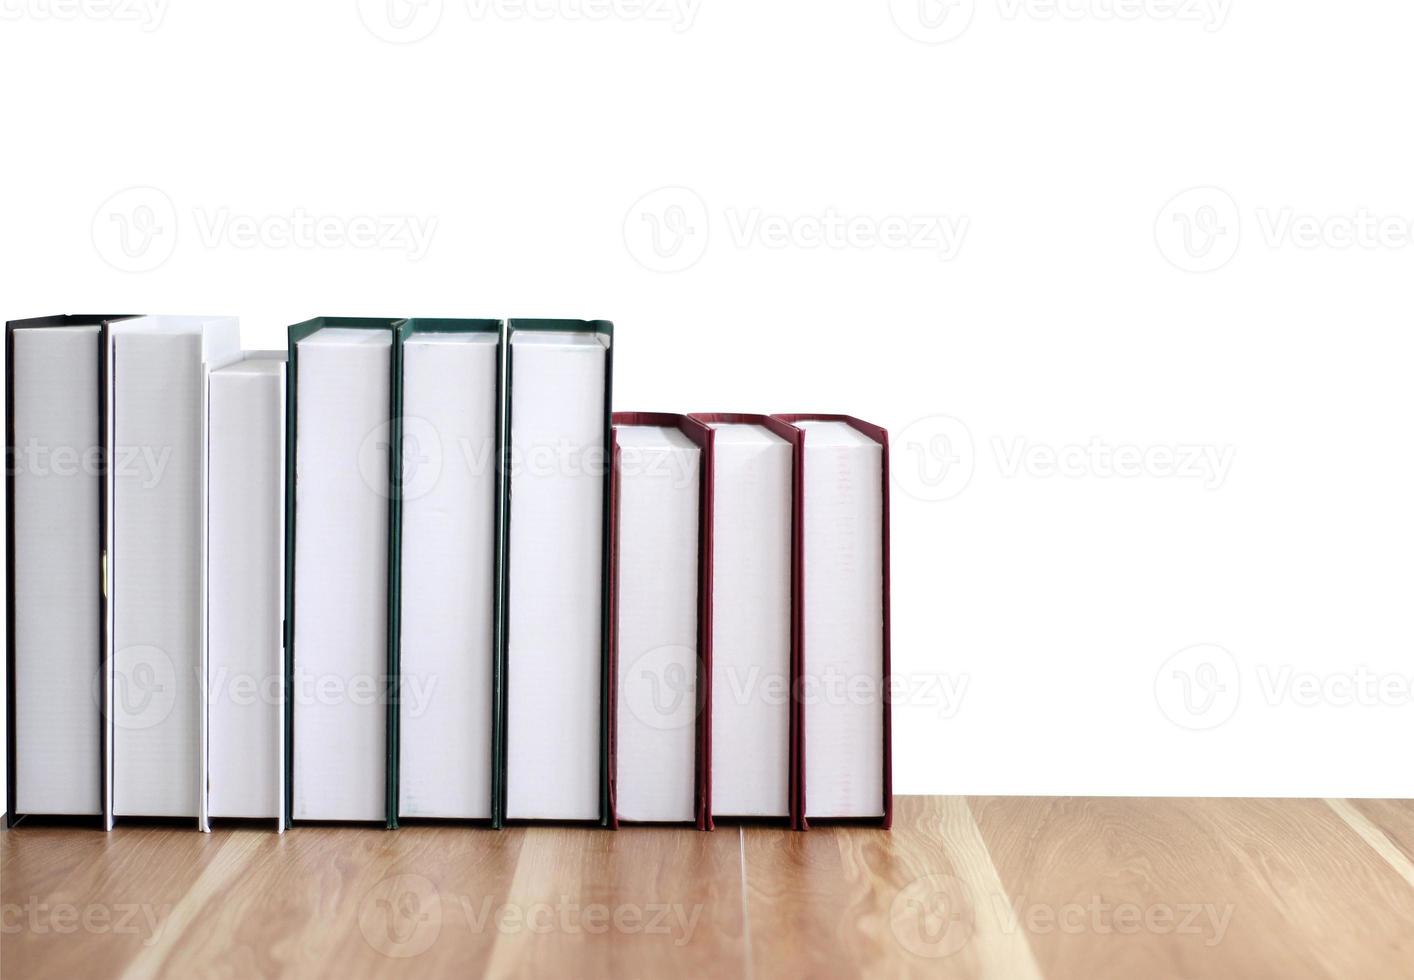 new books on a wooden table isolated on white background photo